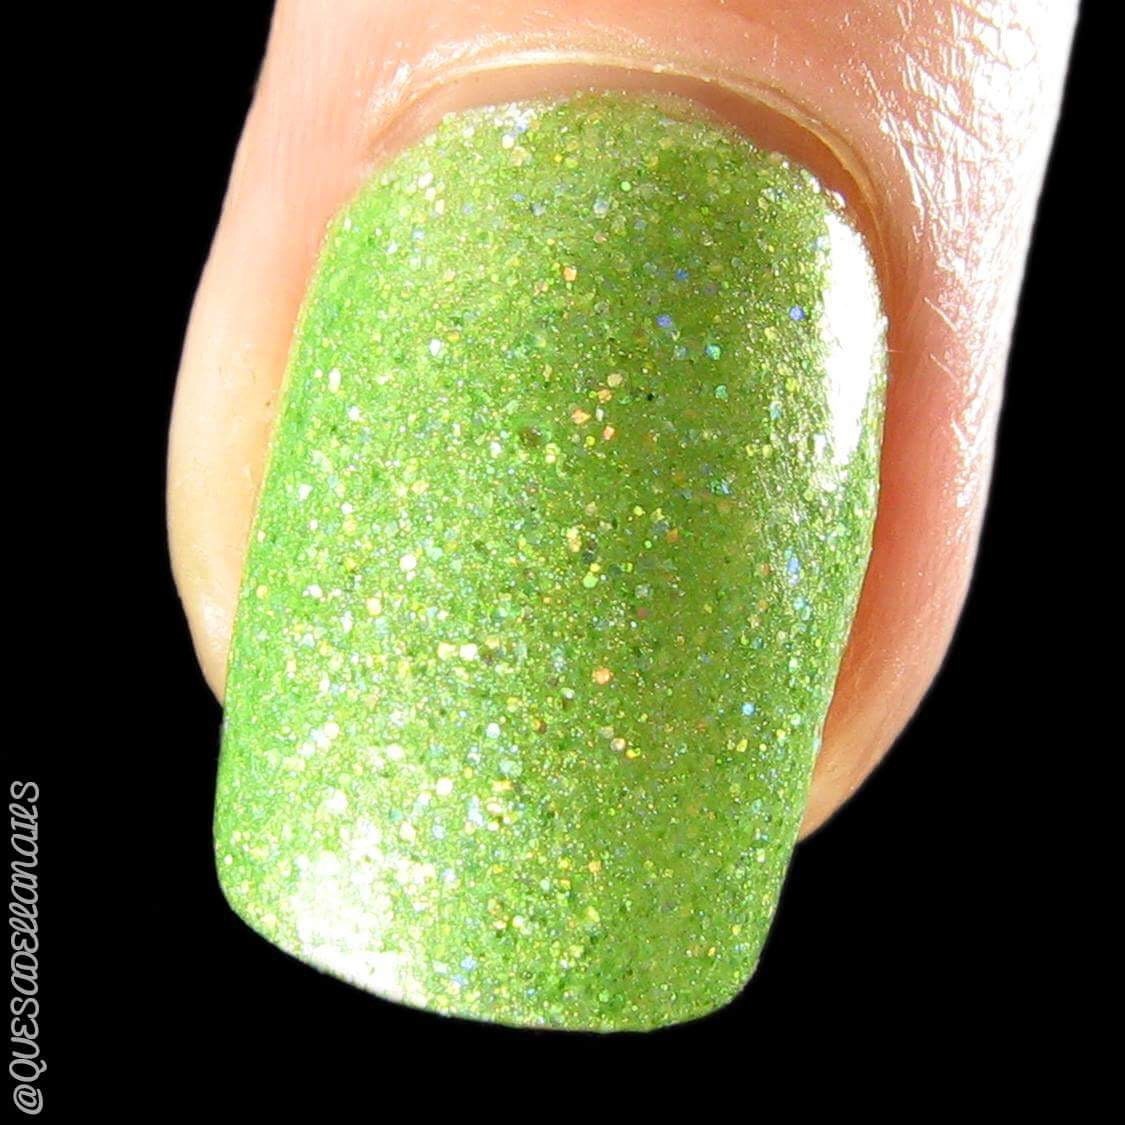 Party Her - Etsy for Gifts Chemical Holographic Knockout Nail Reduced Hurricane Green Bright Glitter Polish Crystal Collection Vegan,